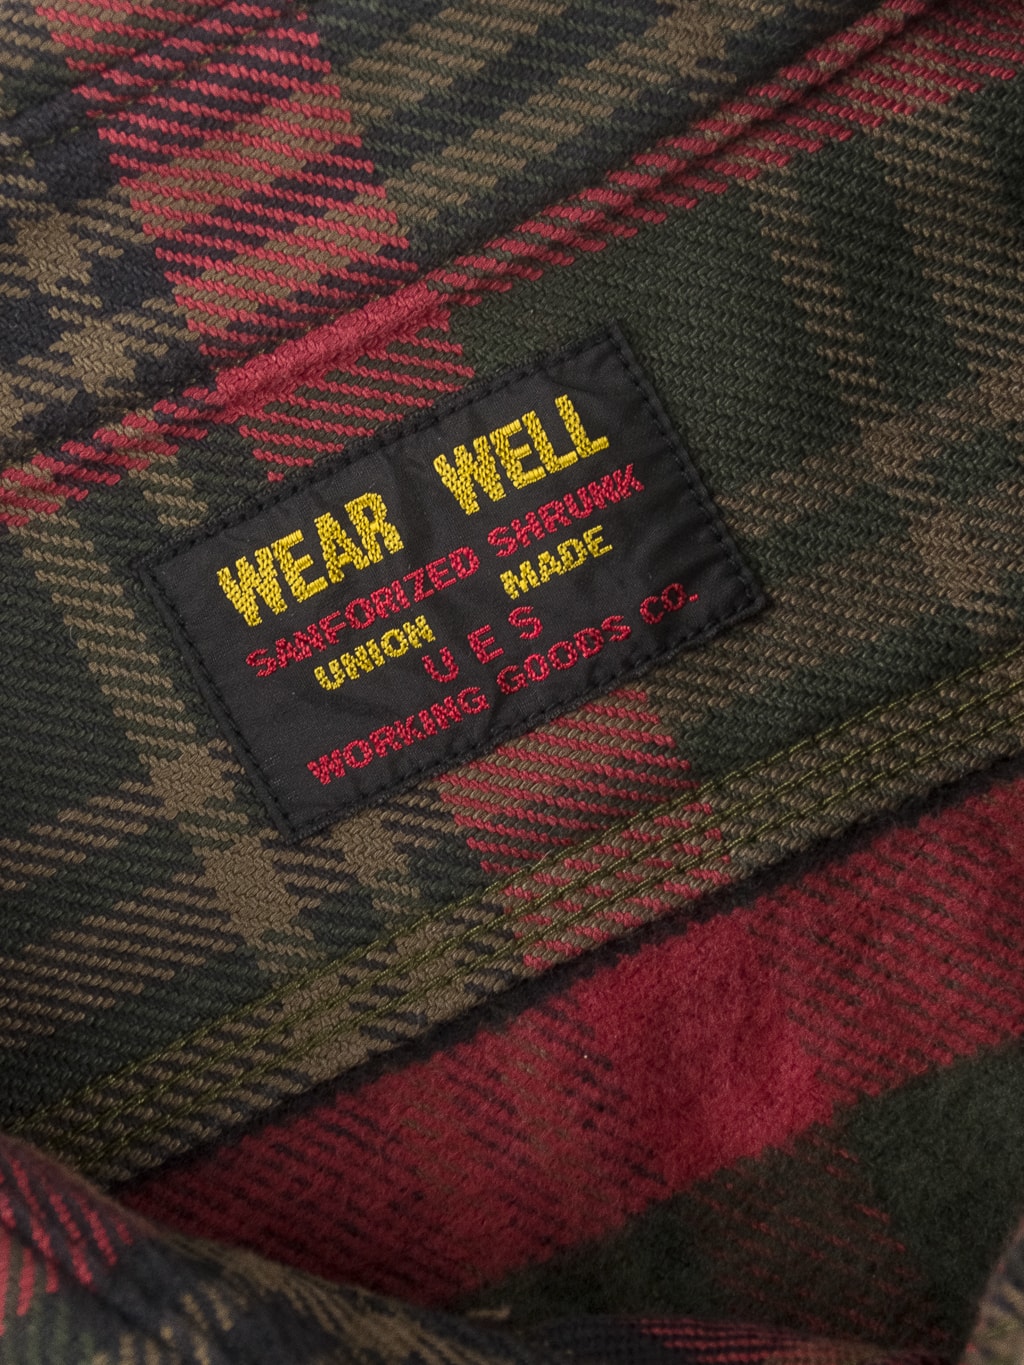 ues extra heavy selvedge flannel shirt red  interior tag